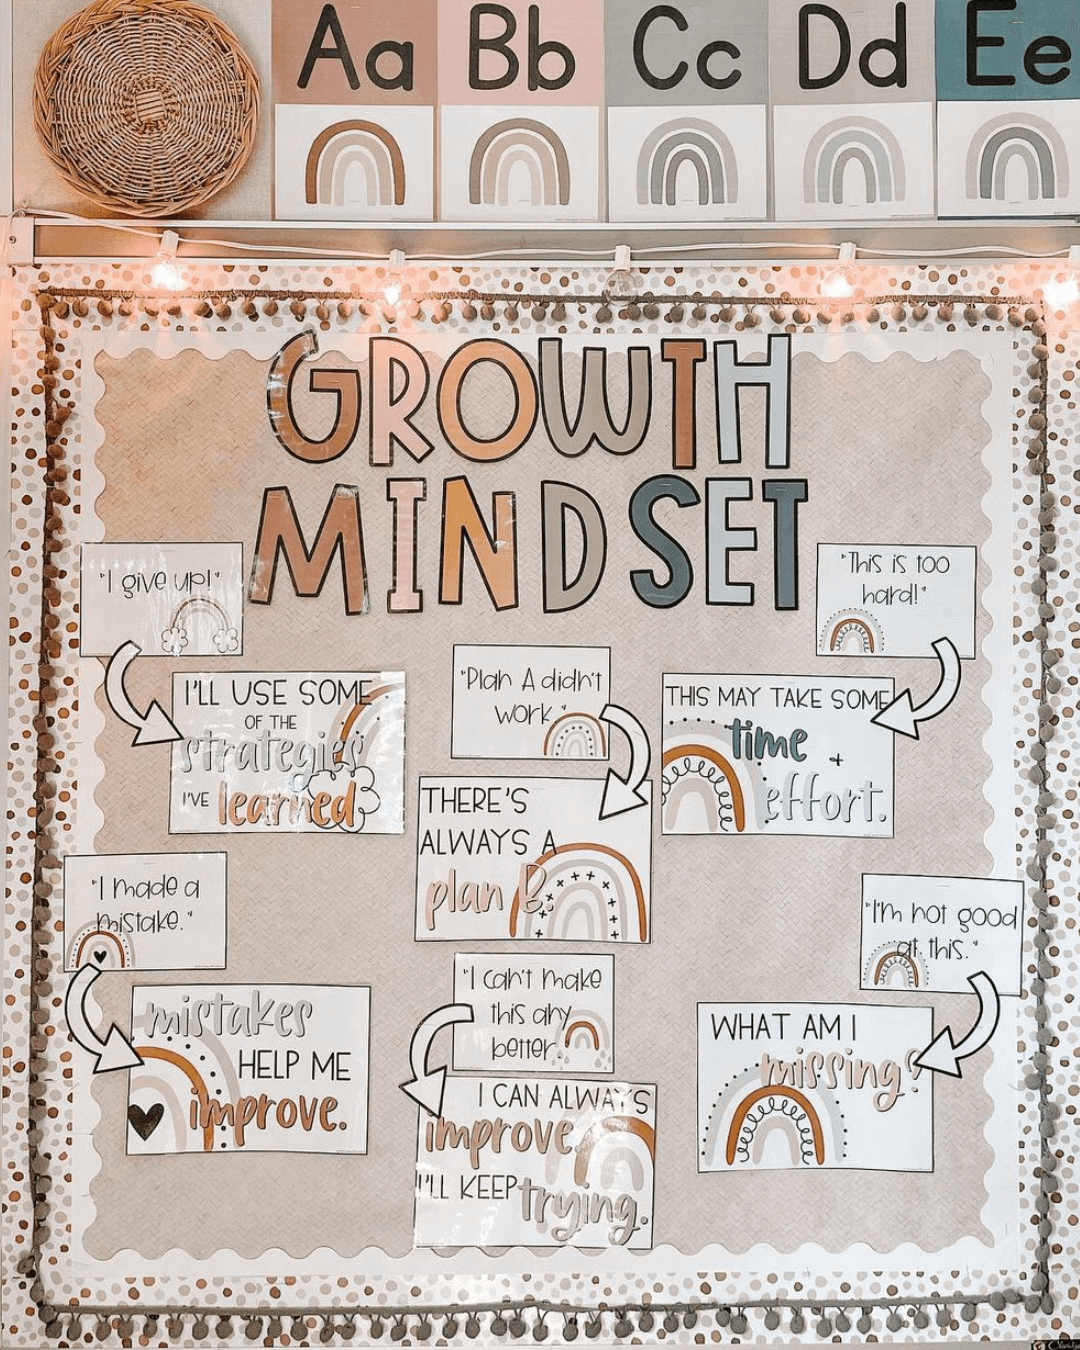 Two images show a Growth Mindset Display which is comprised of a series of limiting statements, followed by positive affirmations. In the right image, a teacher stands in front of her display with a big smile and her arms outstretched.